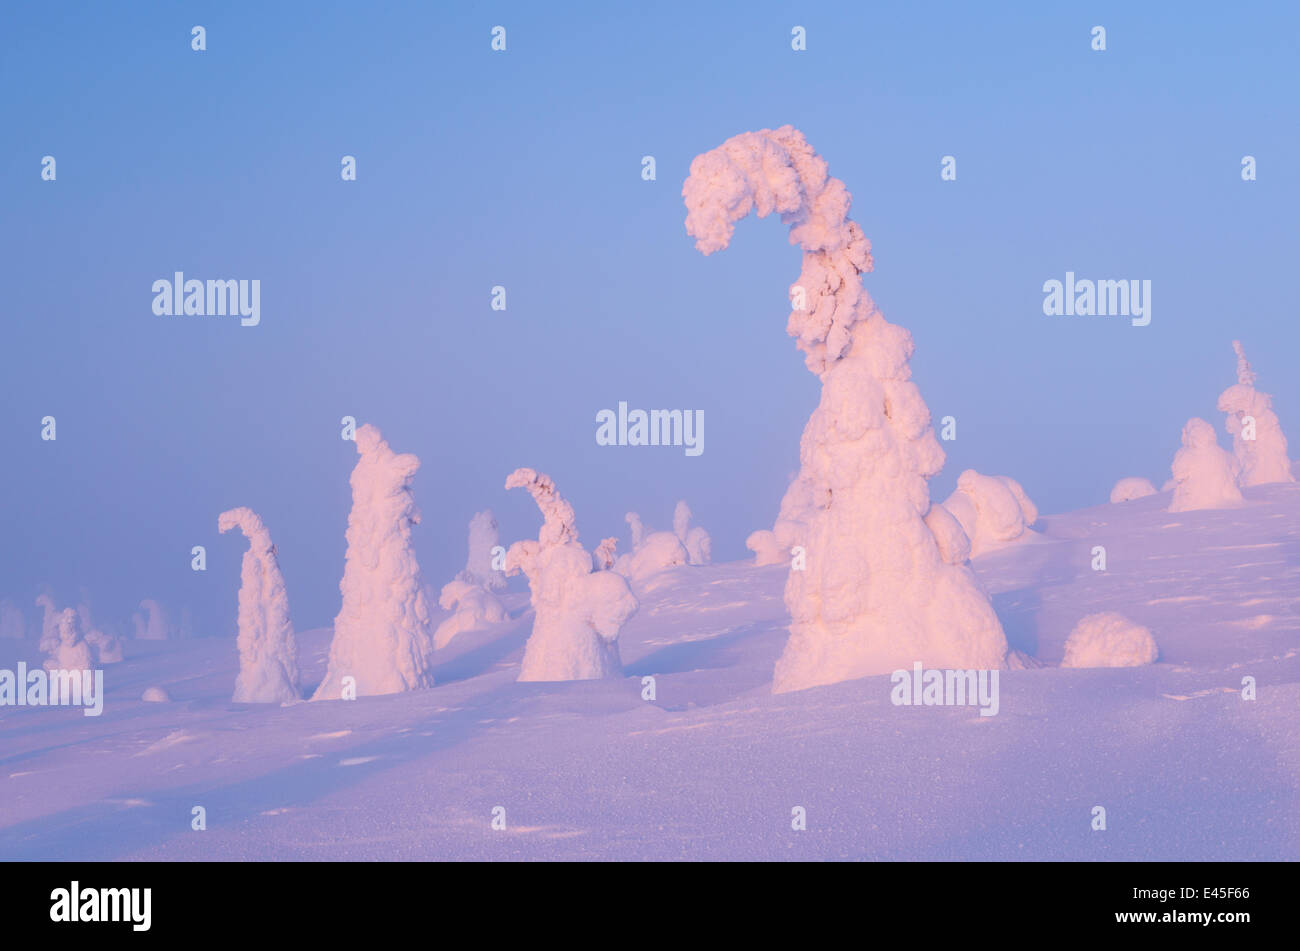 Snow covered trees, Riisitunturi National Park, Finland, February 2009 Stock Photo